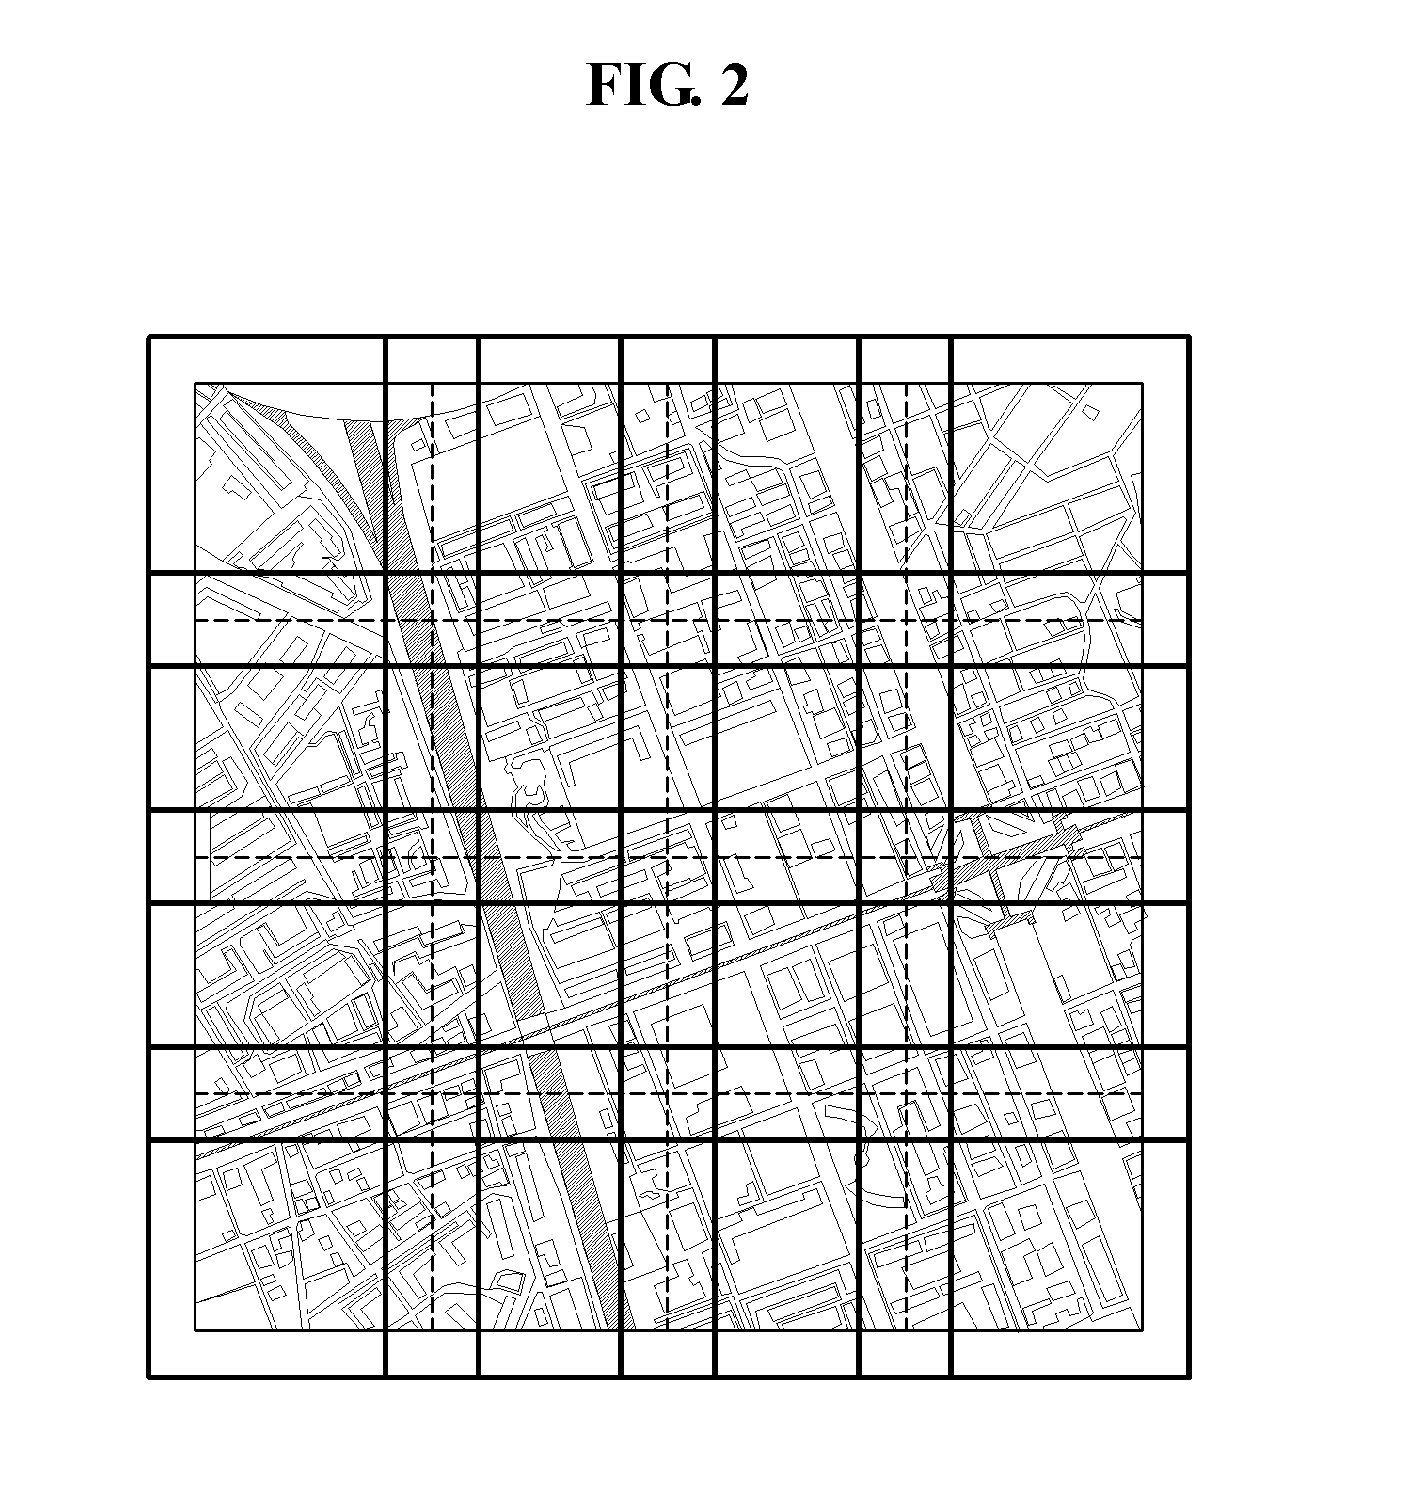 System and method for providing tile-map using electronic navigation chart